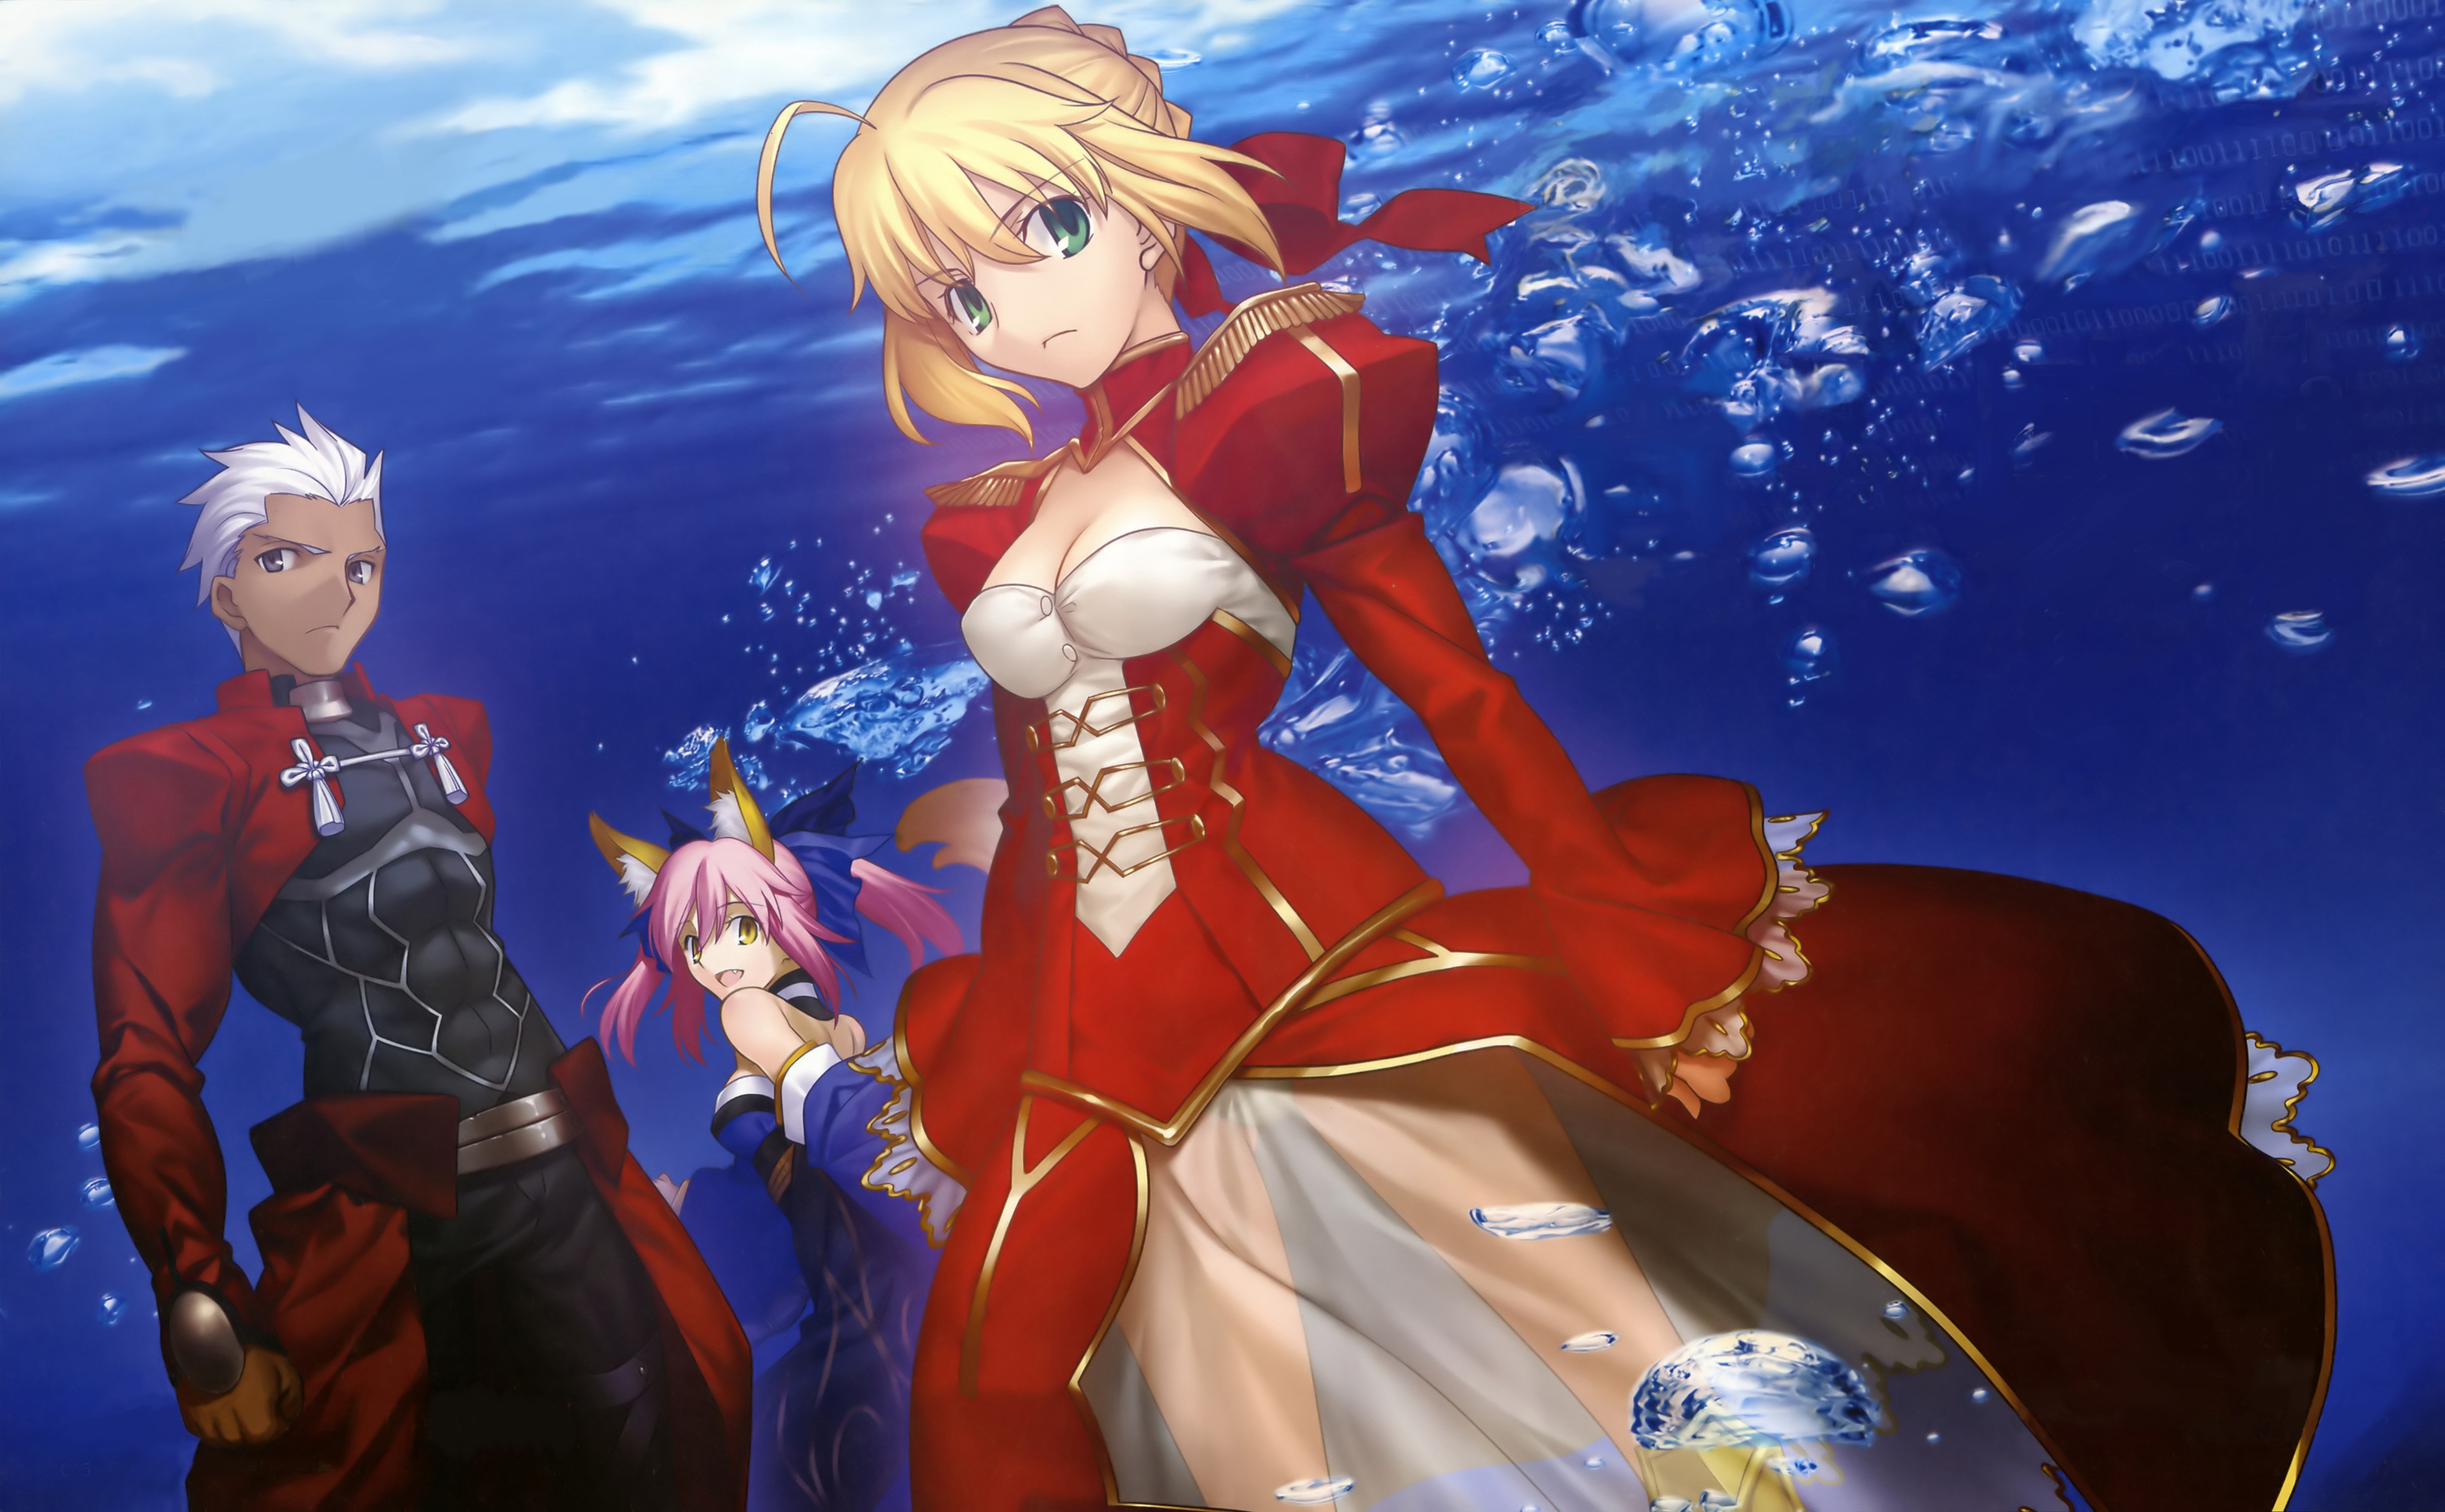 night, Saber, anime girls, Archer (Fate/Stay Night), Fate/EXTRA, Saber Extra, Fate series - desktop wallpaper